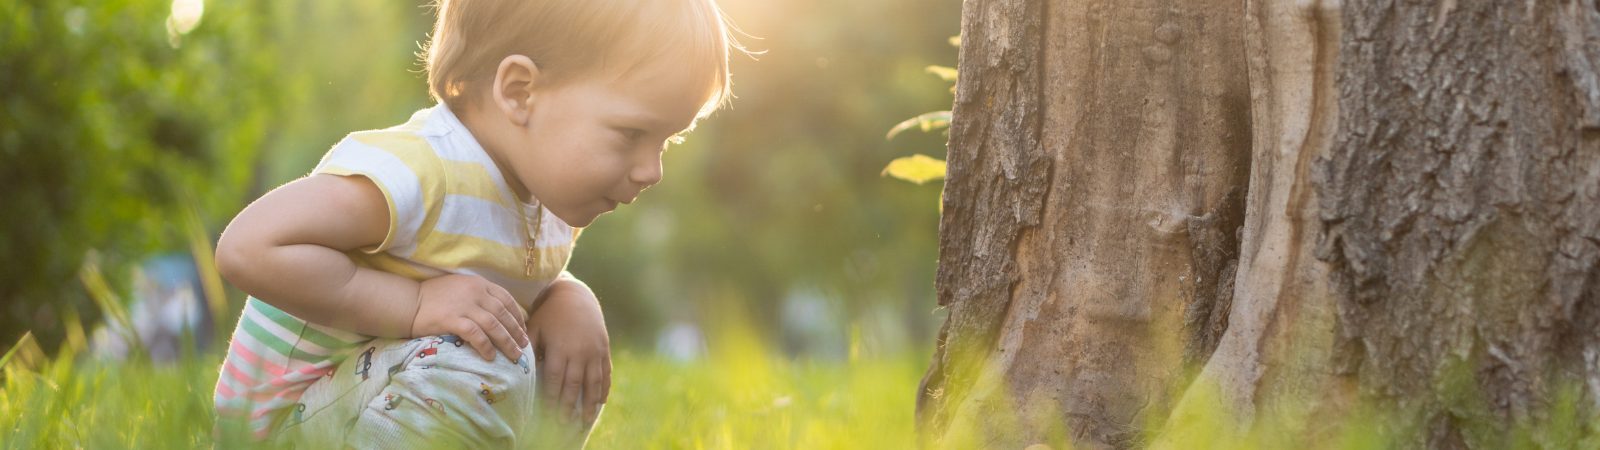 Child actively noticing grass below a tree